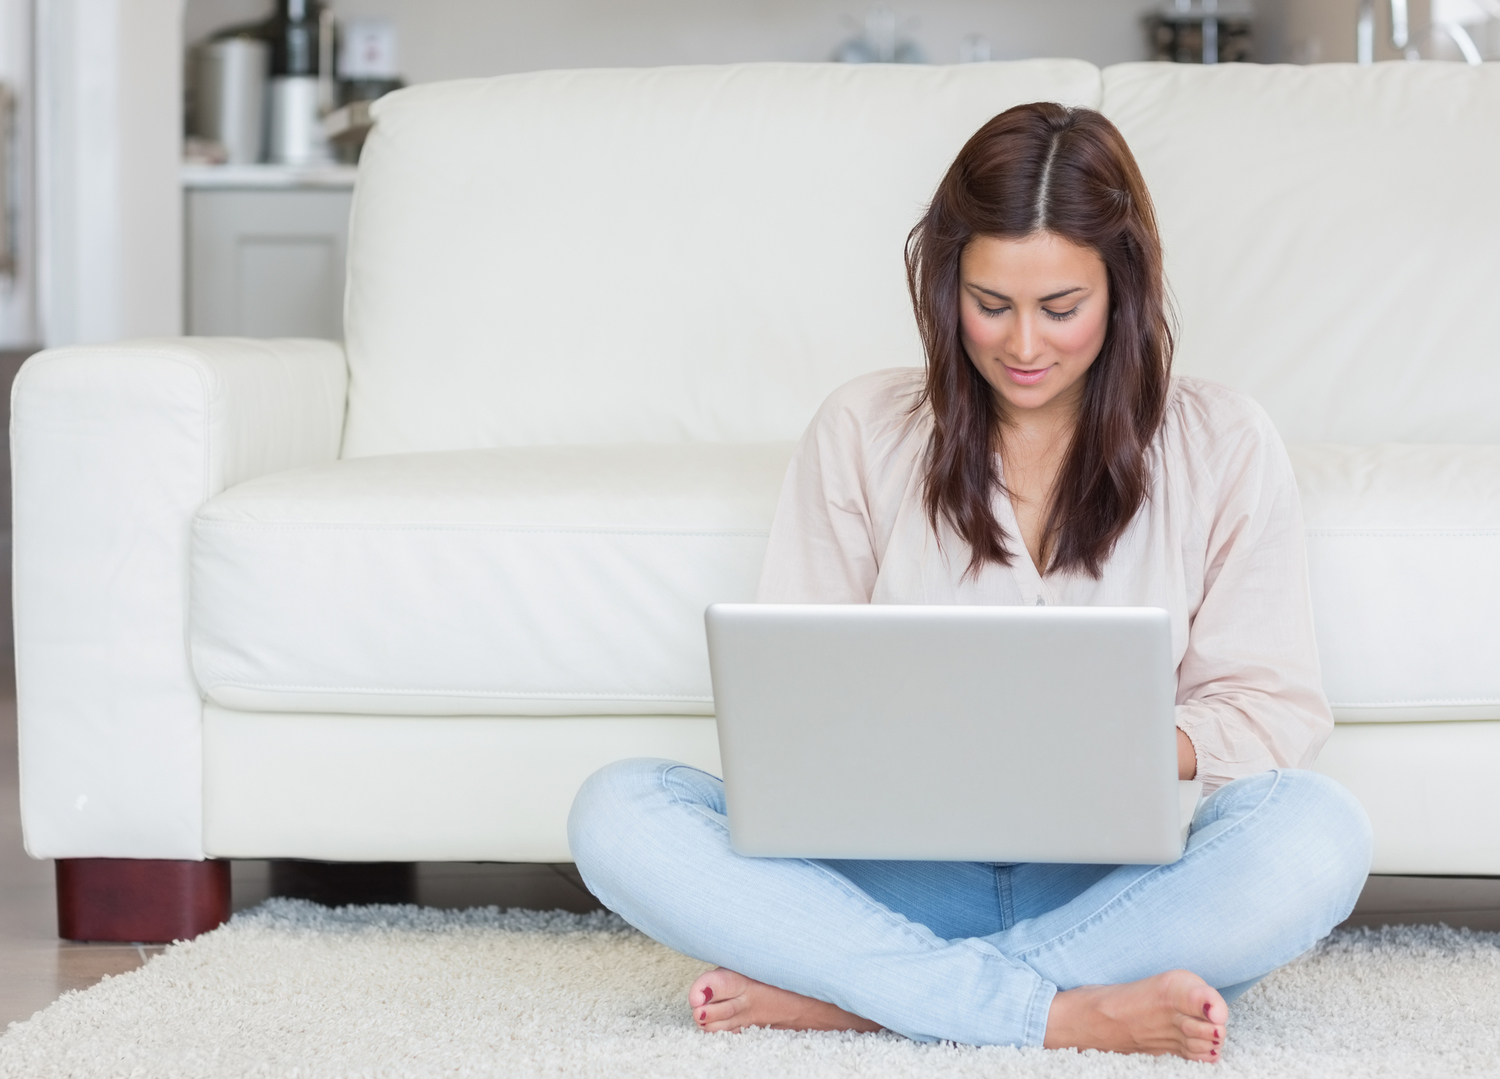 A brunette woman wearing a light pink shirt and light blue jeans sitting on a white carpet in front of a white couch and typing on her new silver laptop.